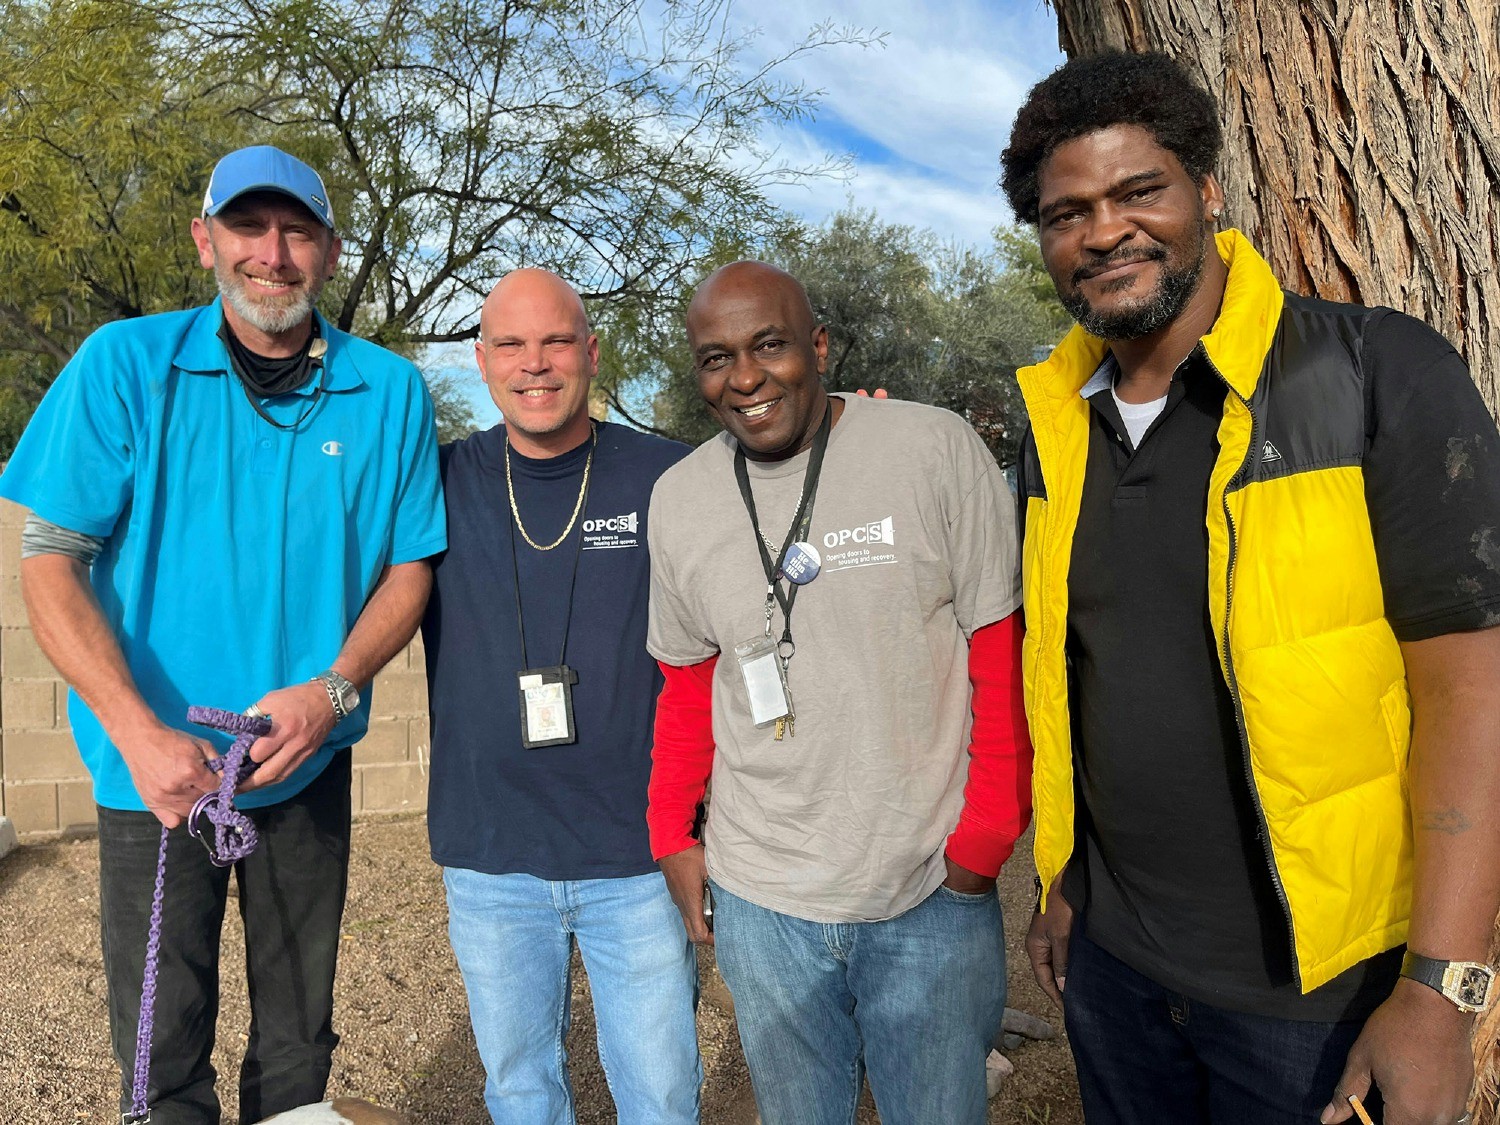 Our dedicated employees conducting street outreach to connect unsheltered individuals with housing and support services.